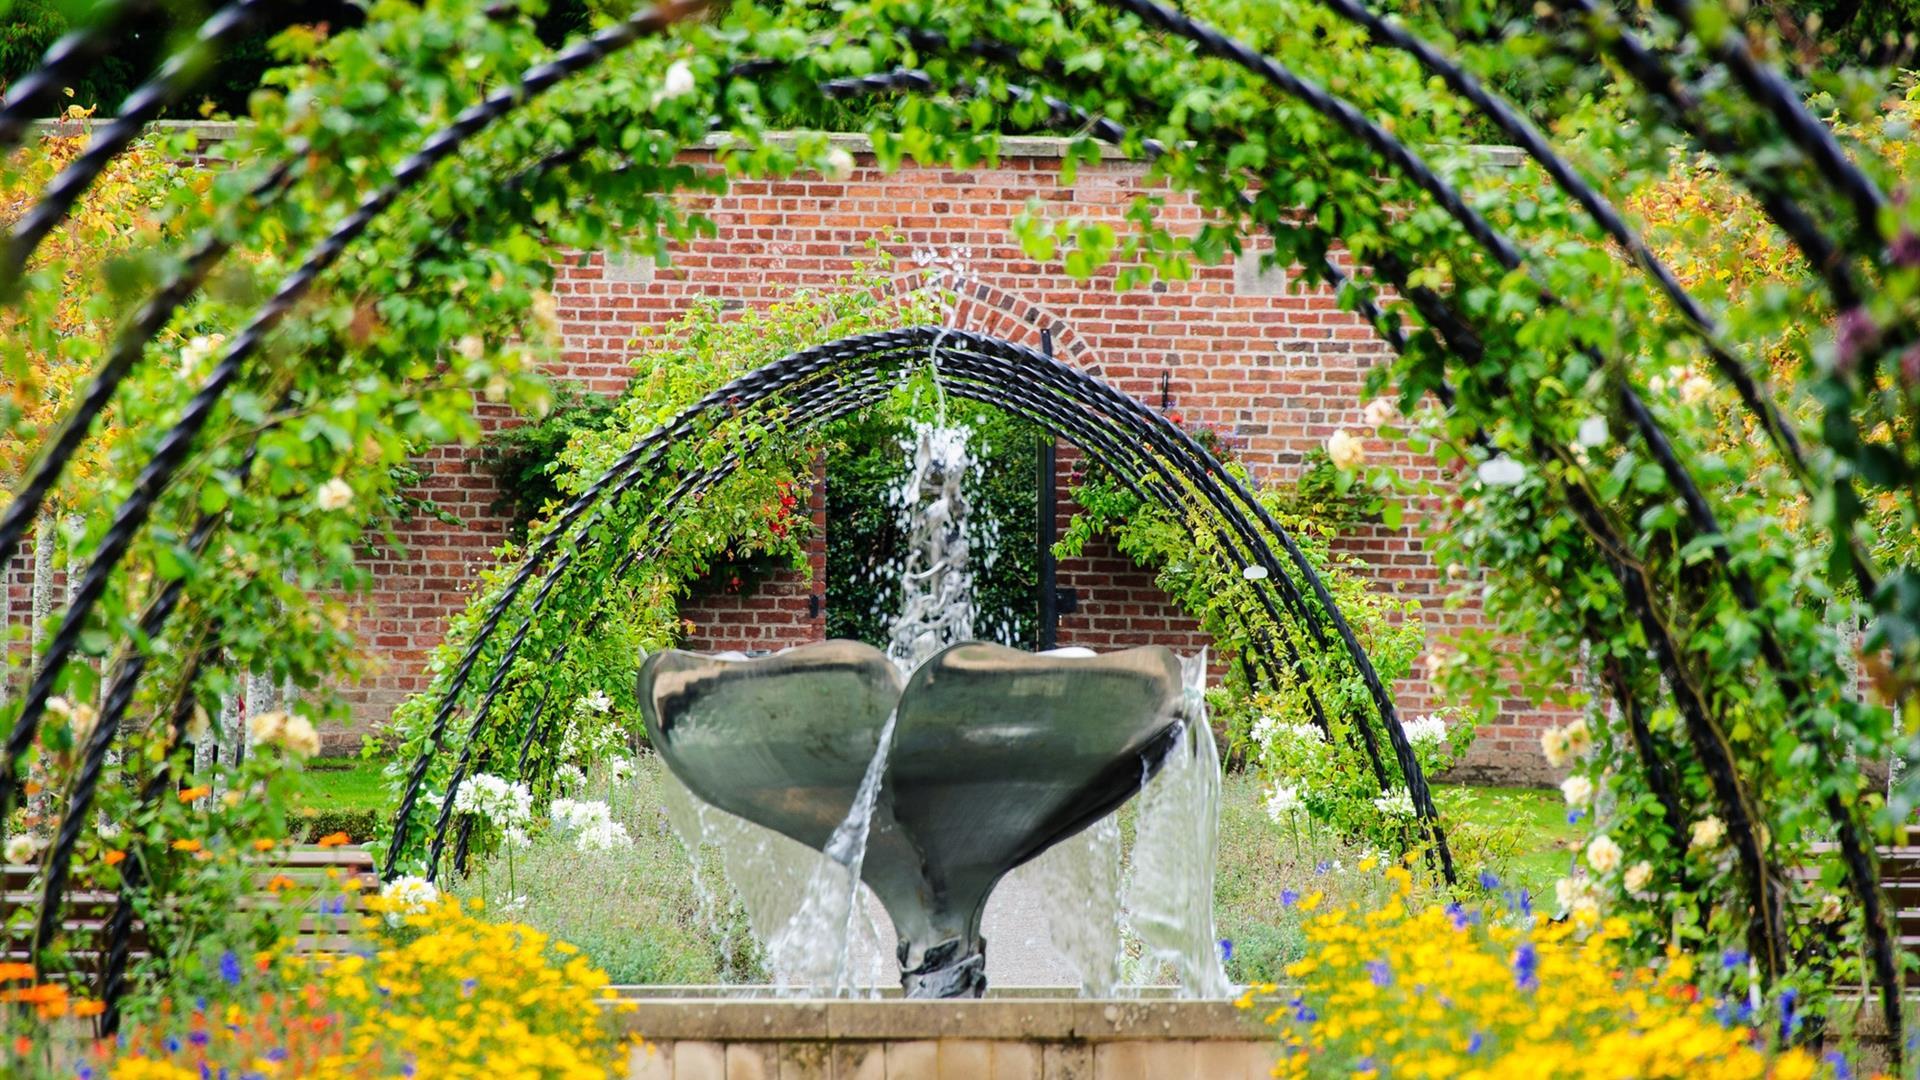 a photograph of a water fountain in the bangor walled garden surrounded by metal arches and colourful flowers